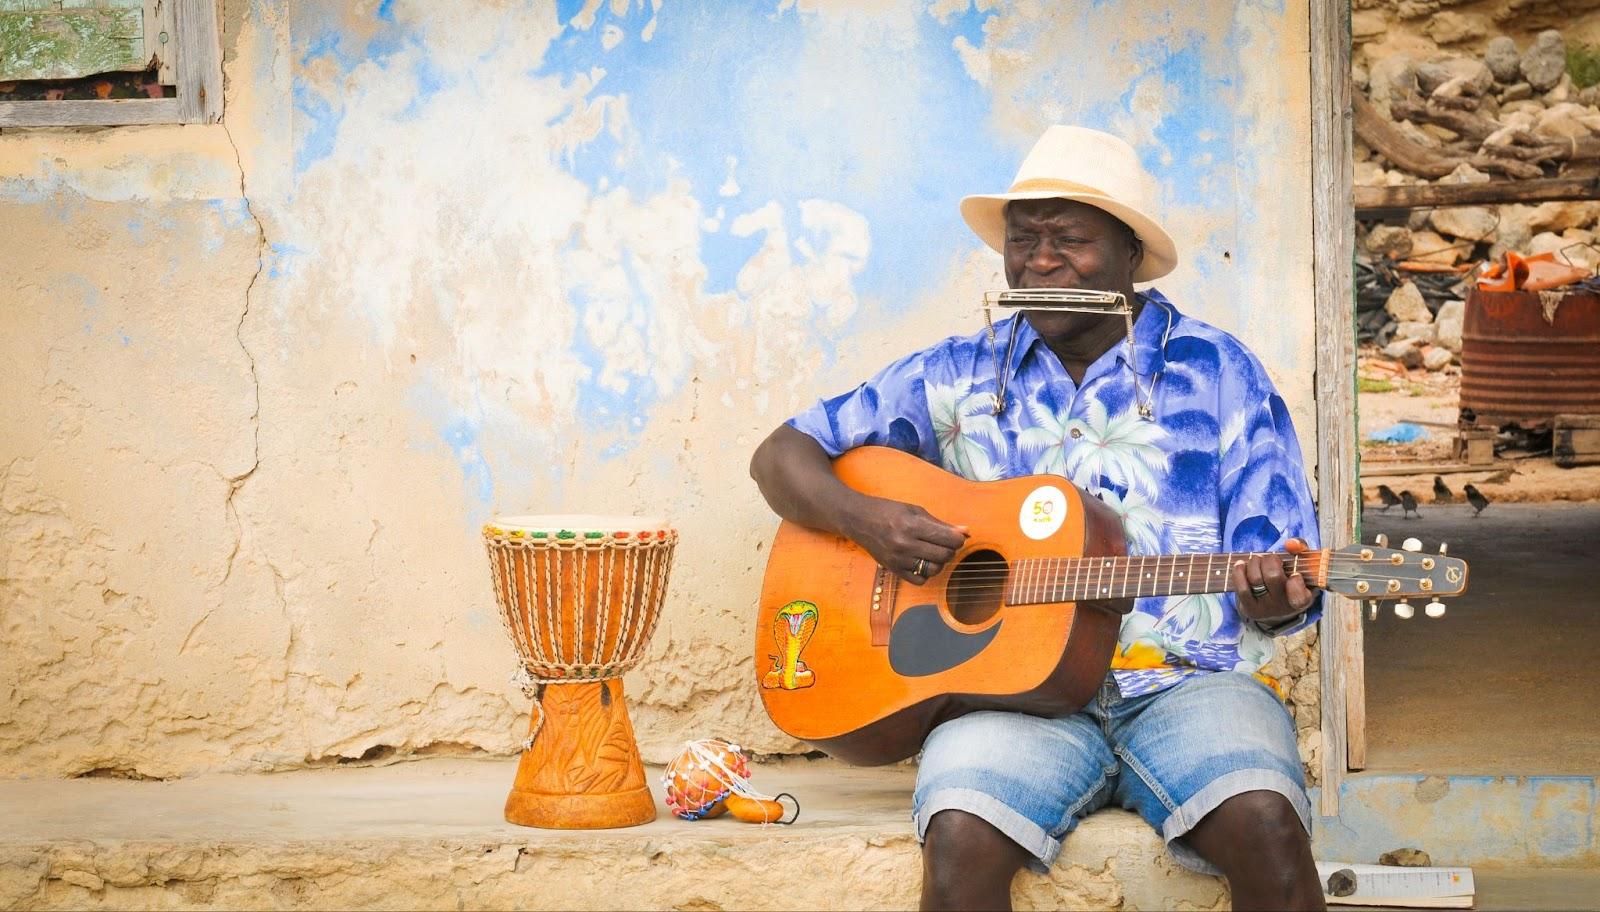 View of local people performing traditional music on the streets of Rabil on the island of Boa Vista, Cape Verde, Africa